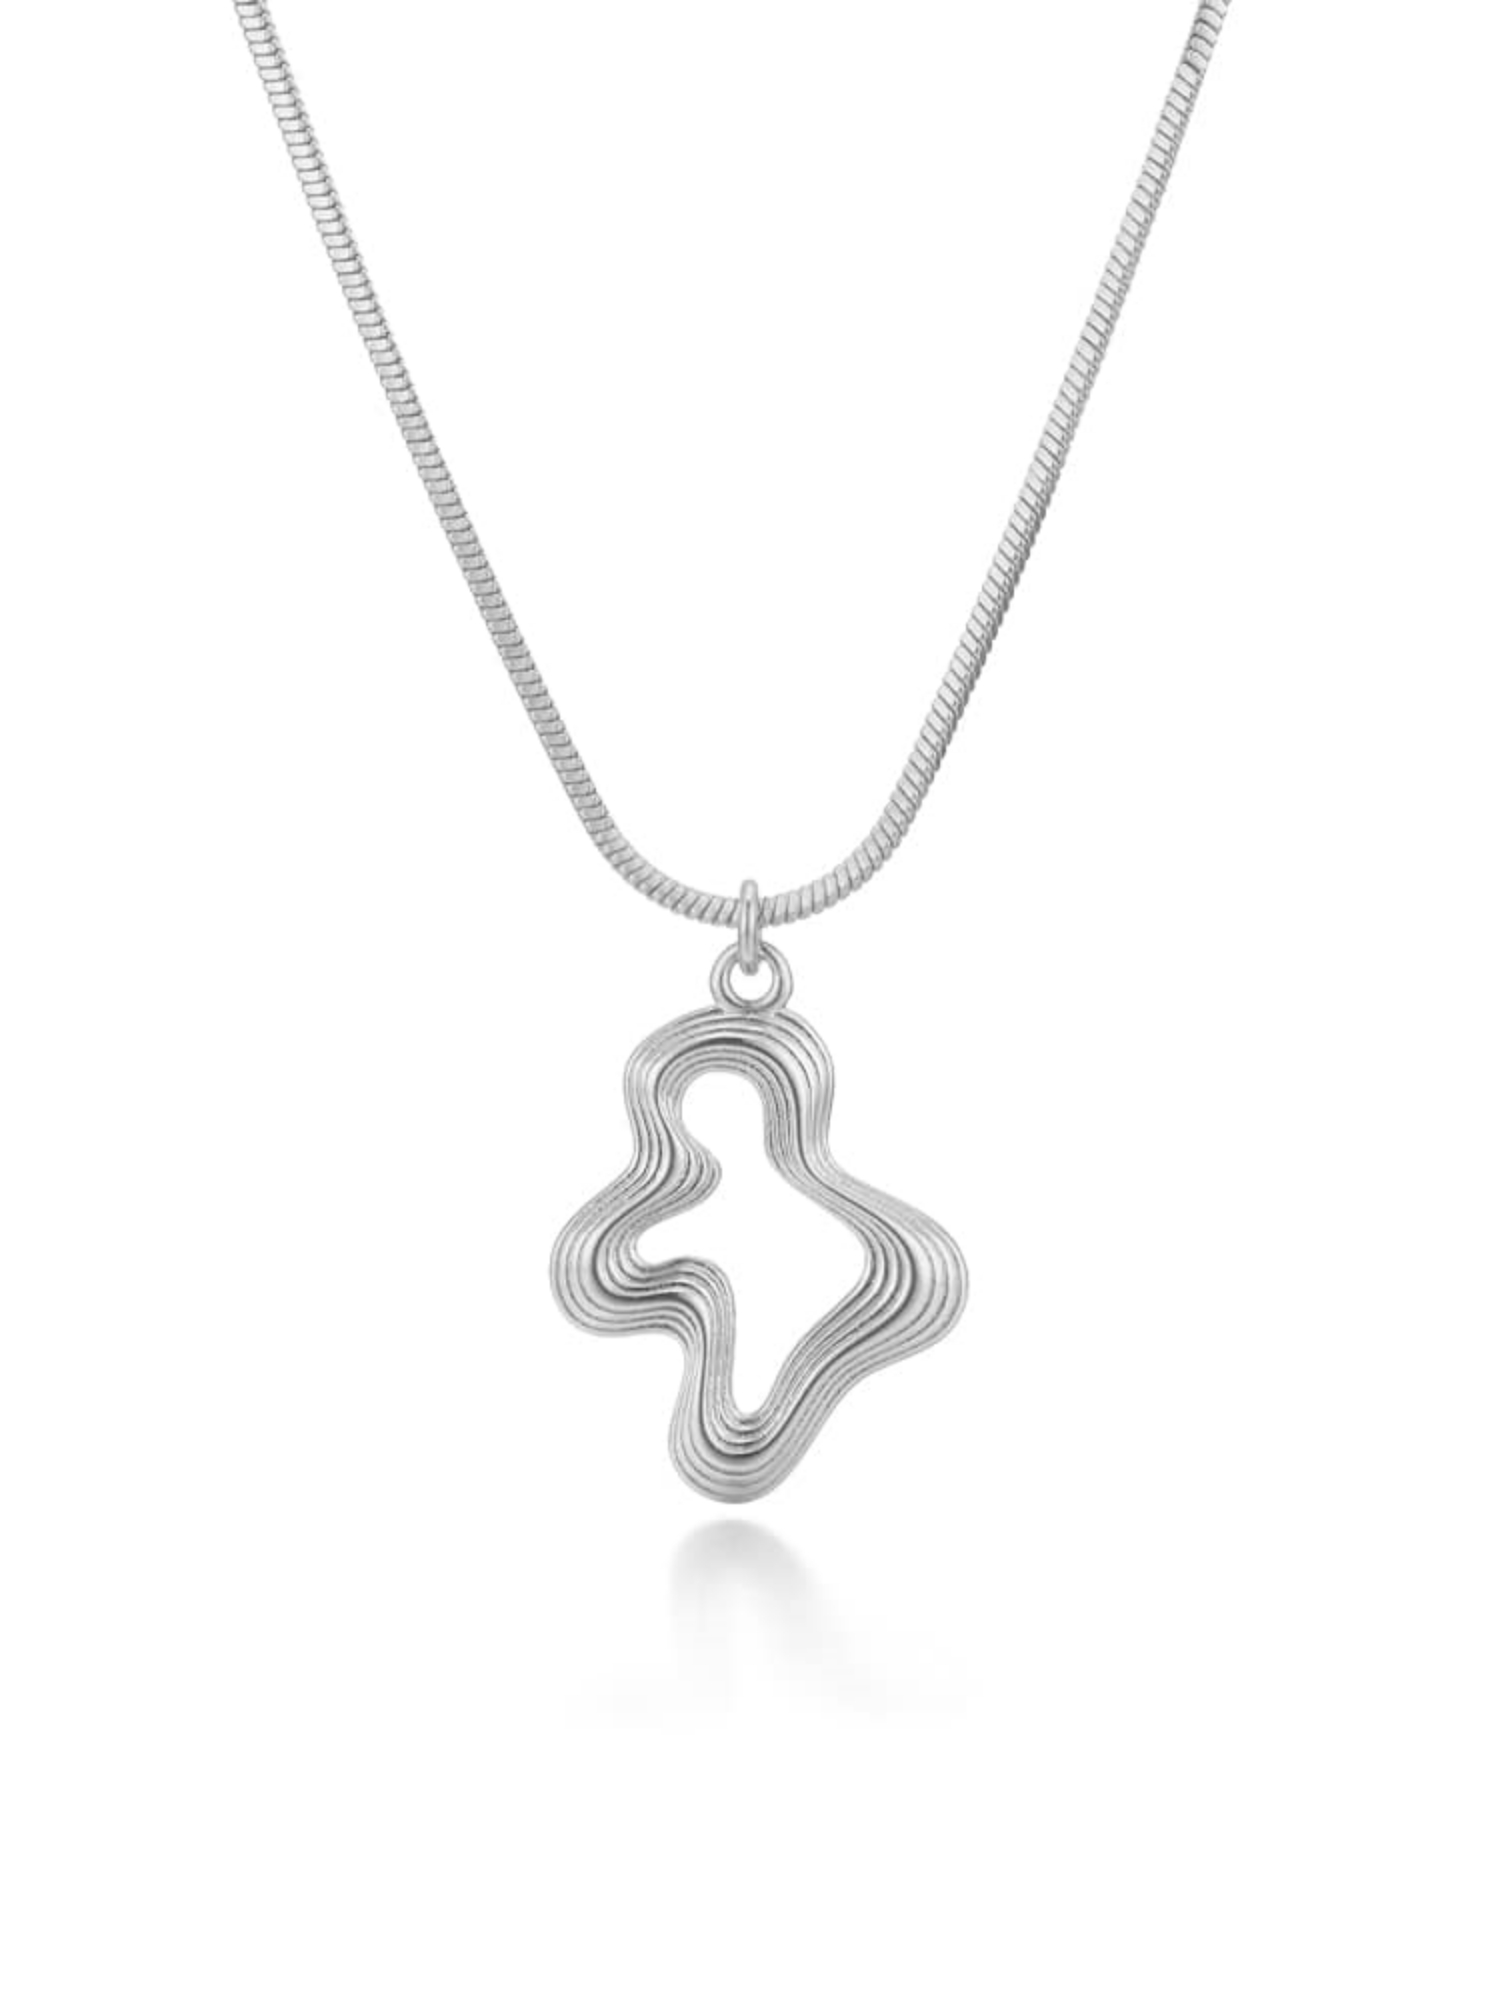 MOMENT Pendant Necklace Silver